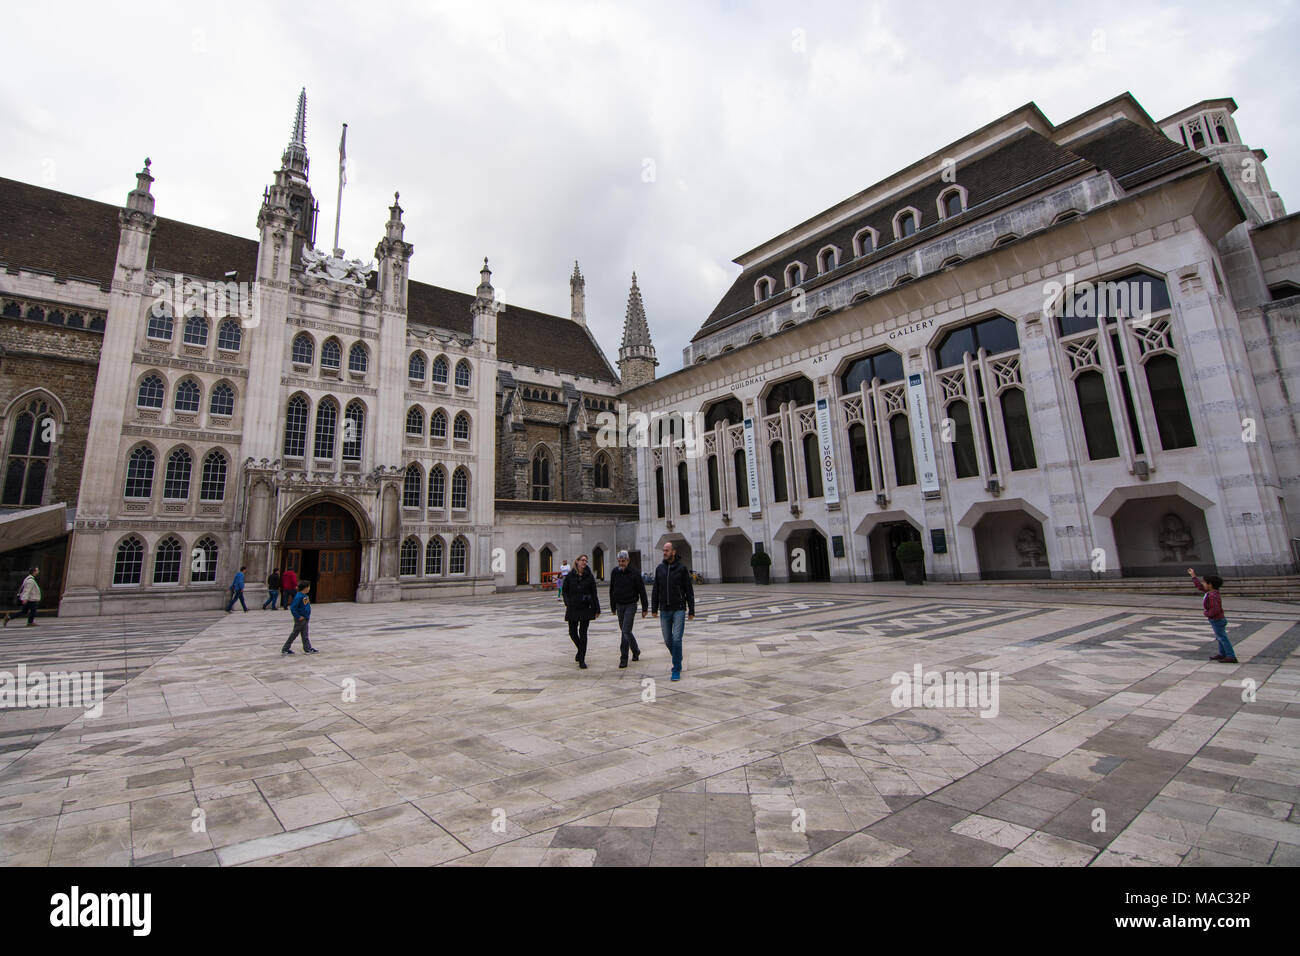 Guildhall, City of London, England. Courtyard, Art Gallery and Historical Town Hall Stock Photo